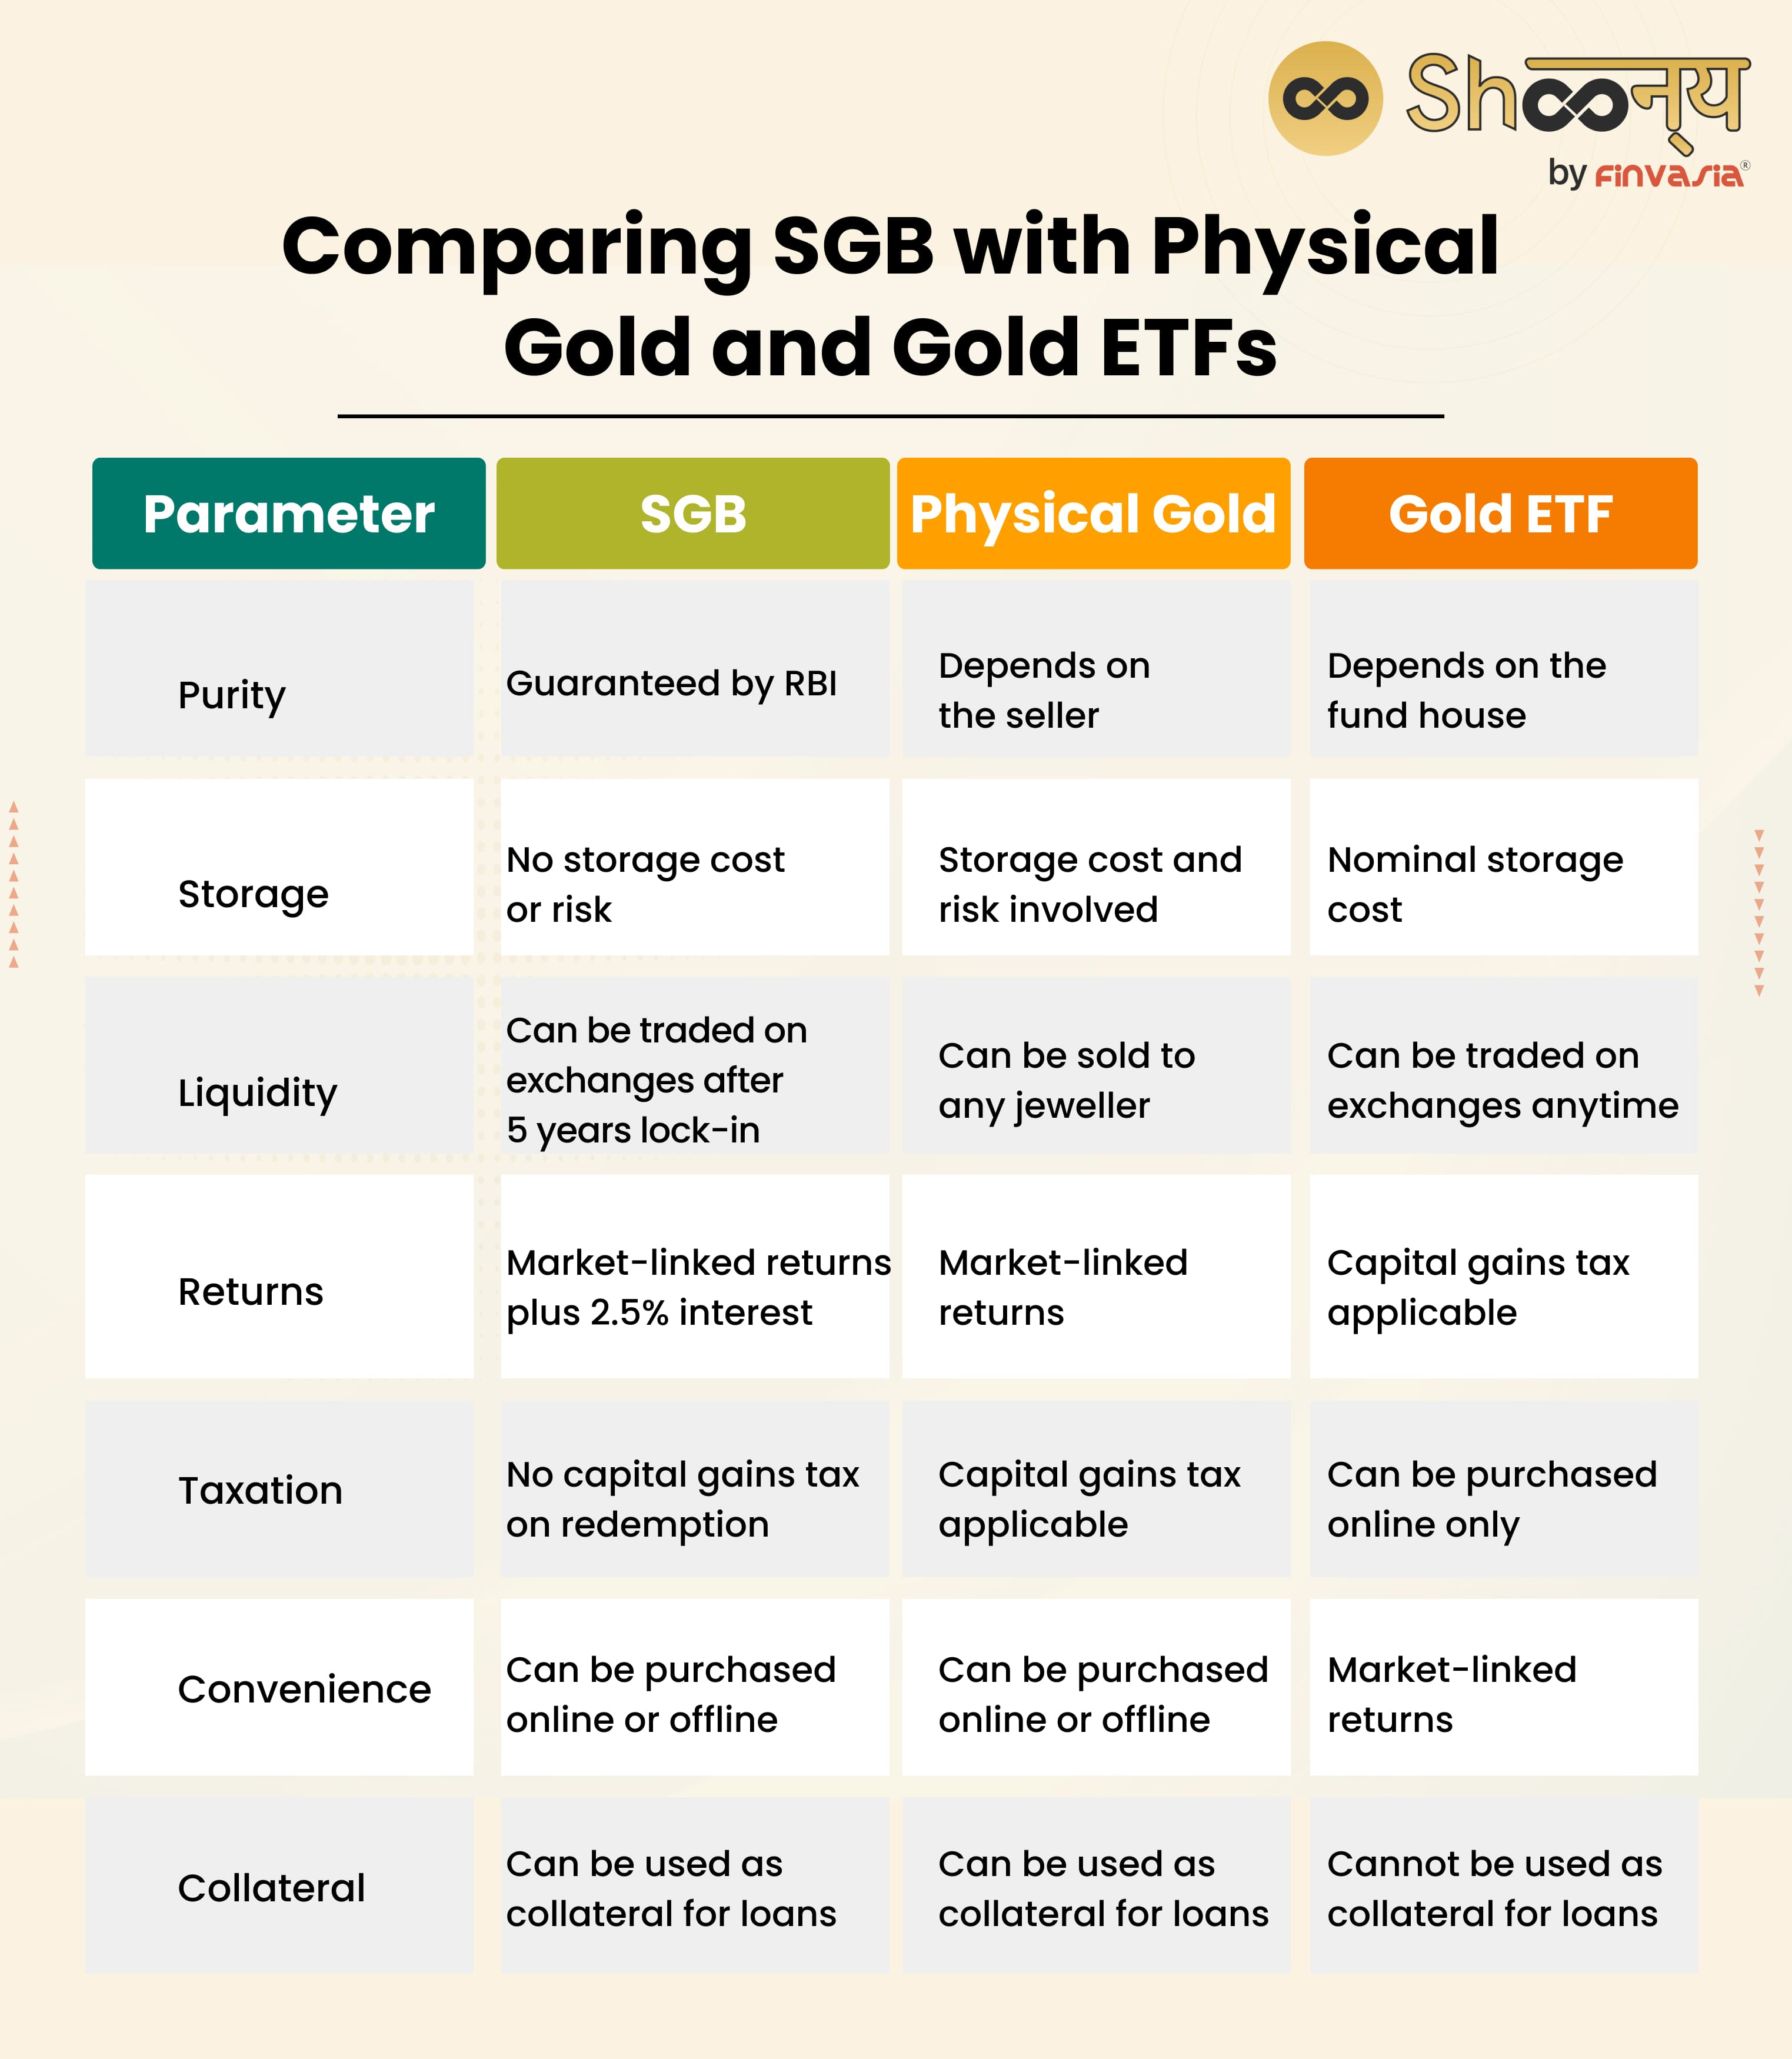 Comparing SGB with Physical Gold and Gold ETFs